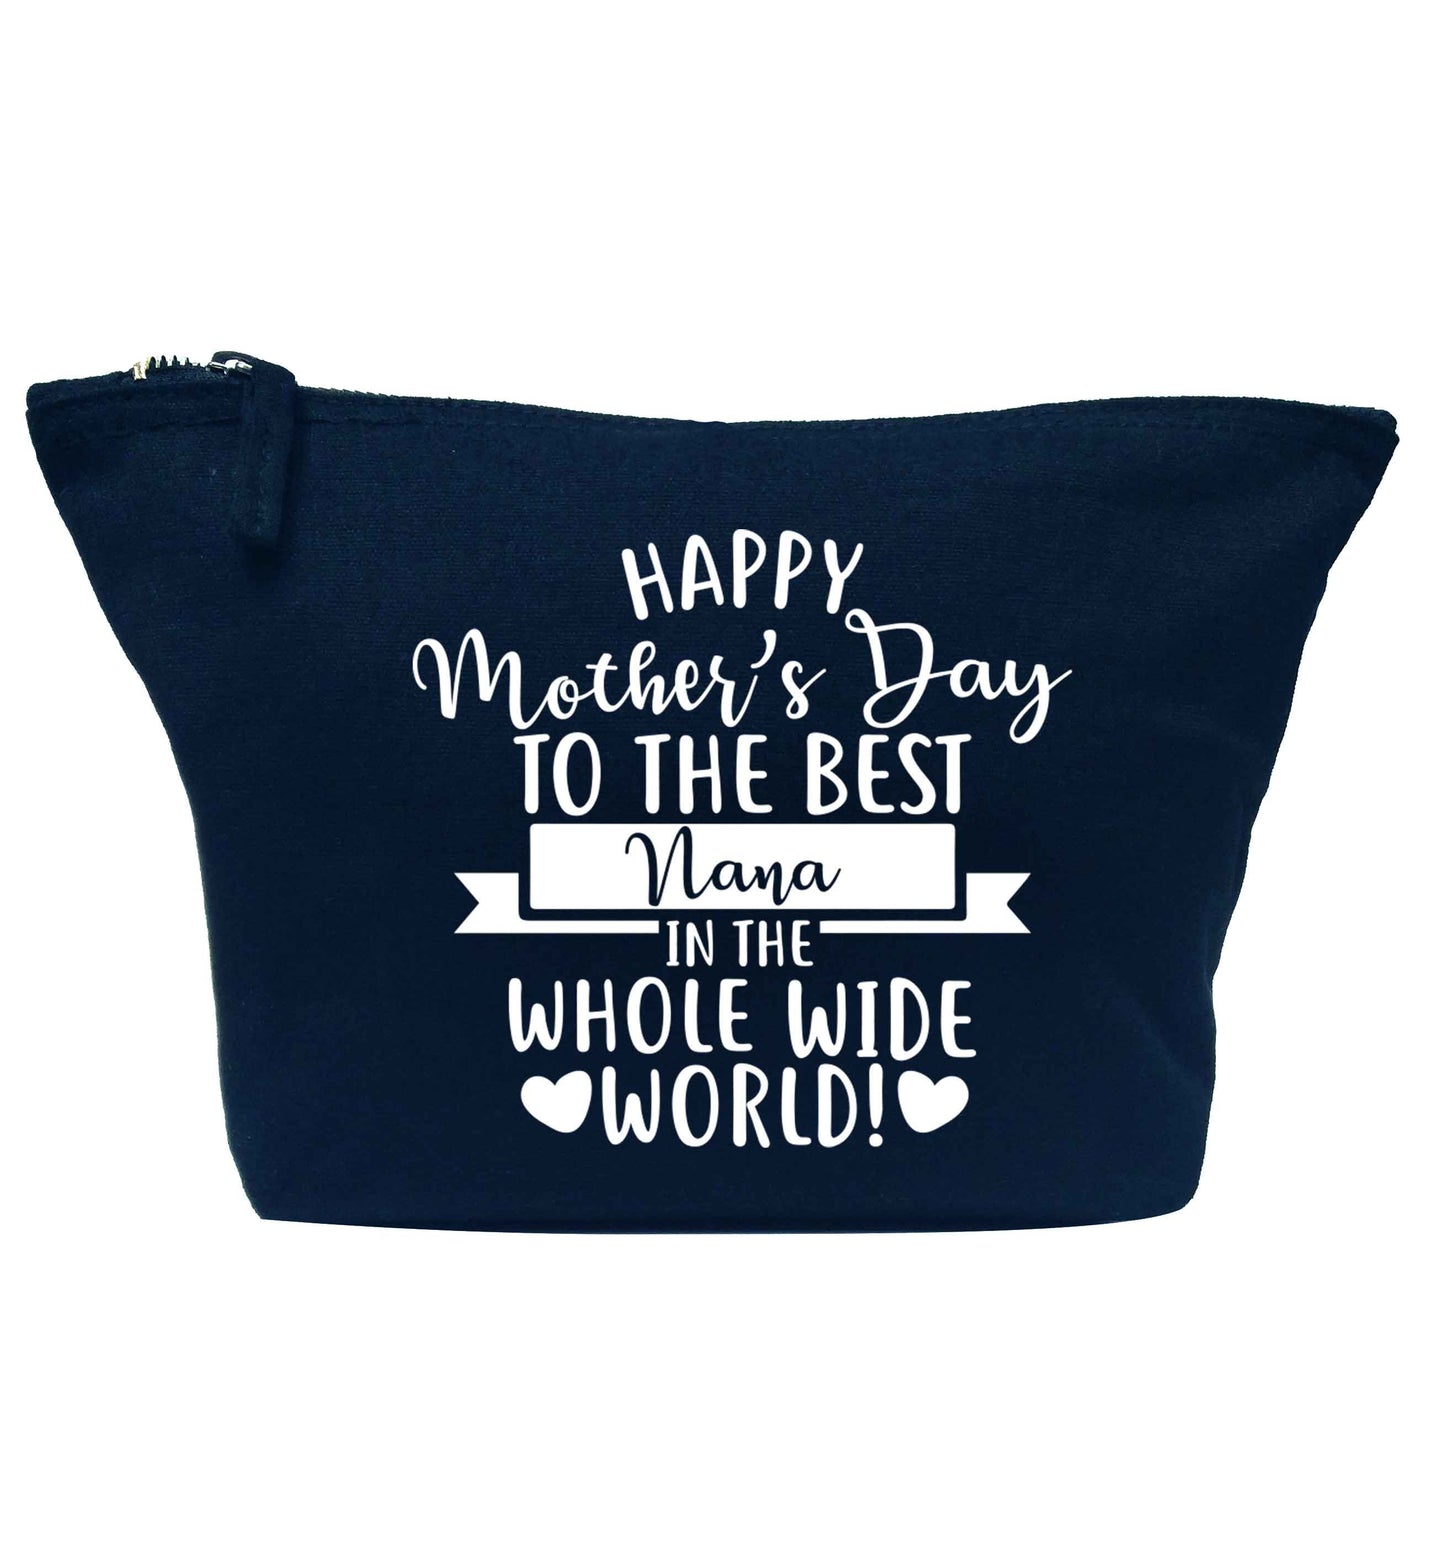 Happy mother's day to the best nana in the world navy makeup bag